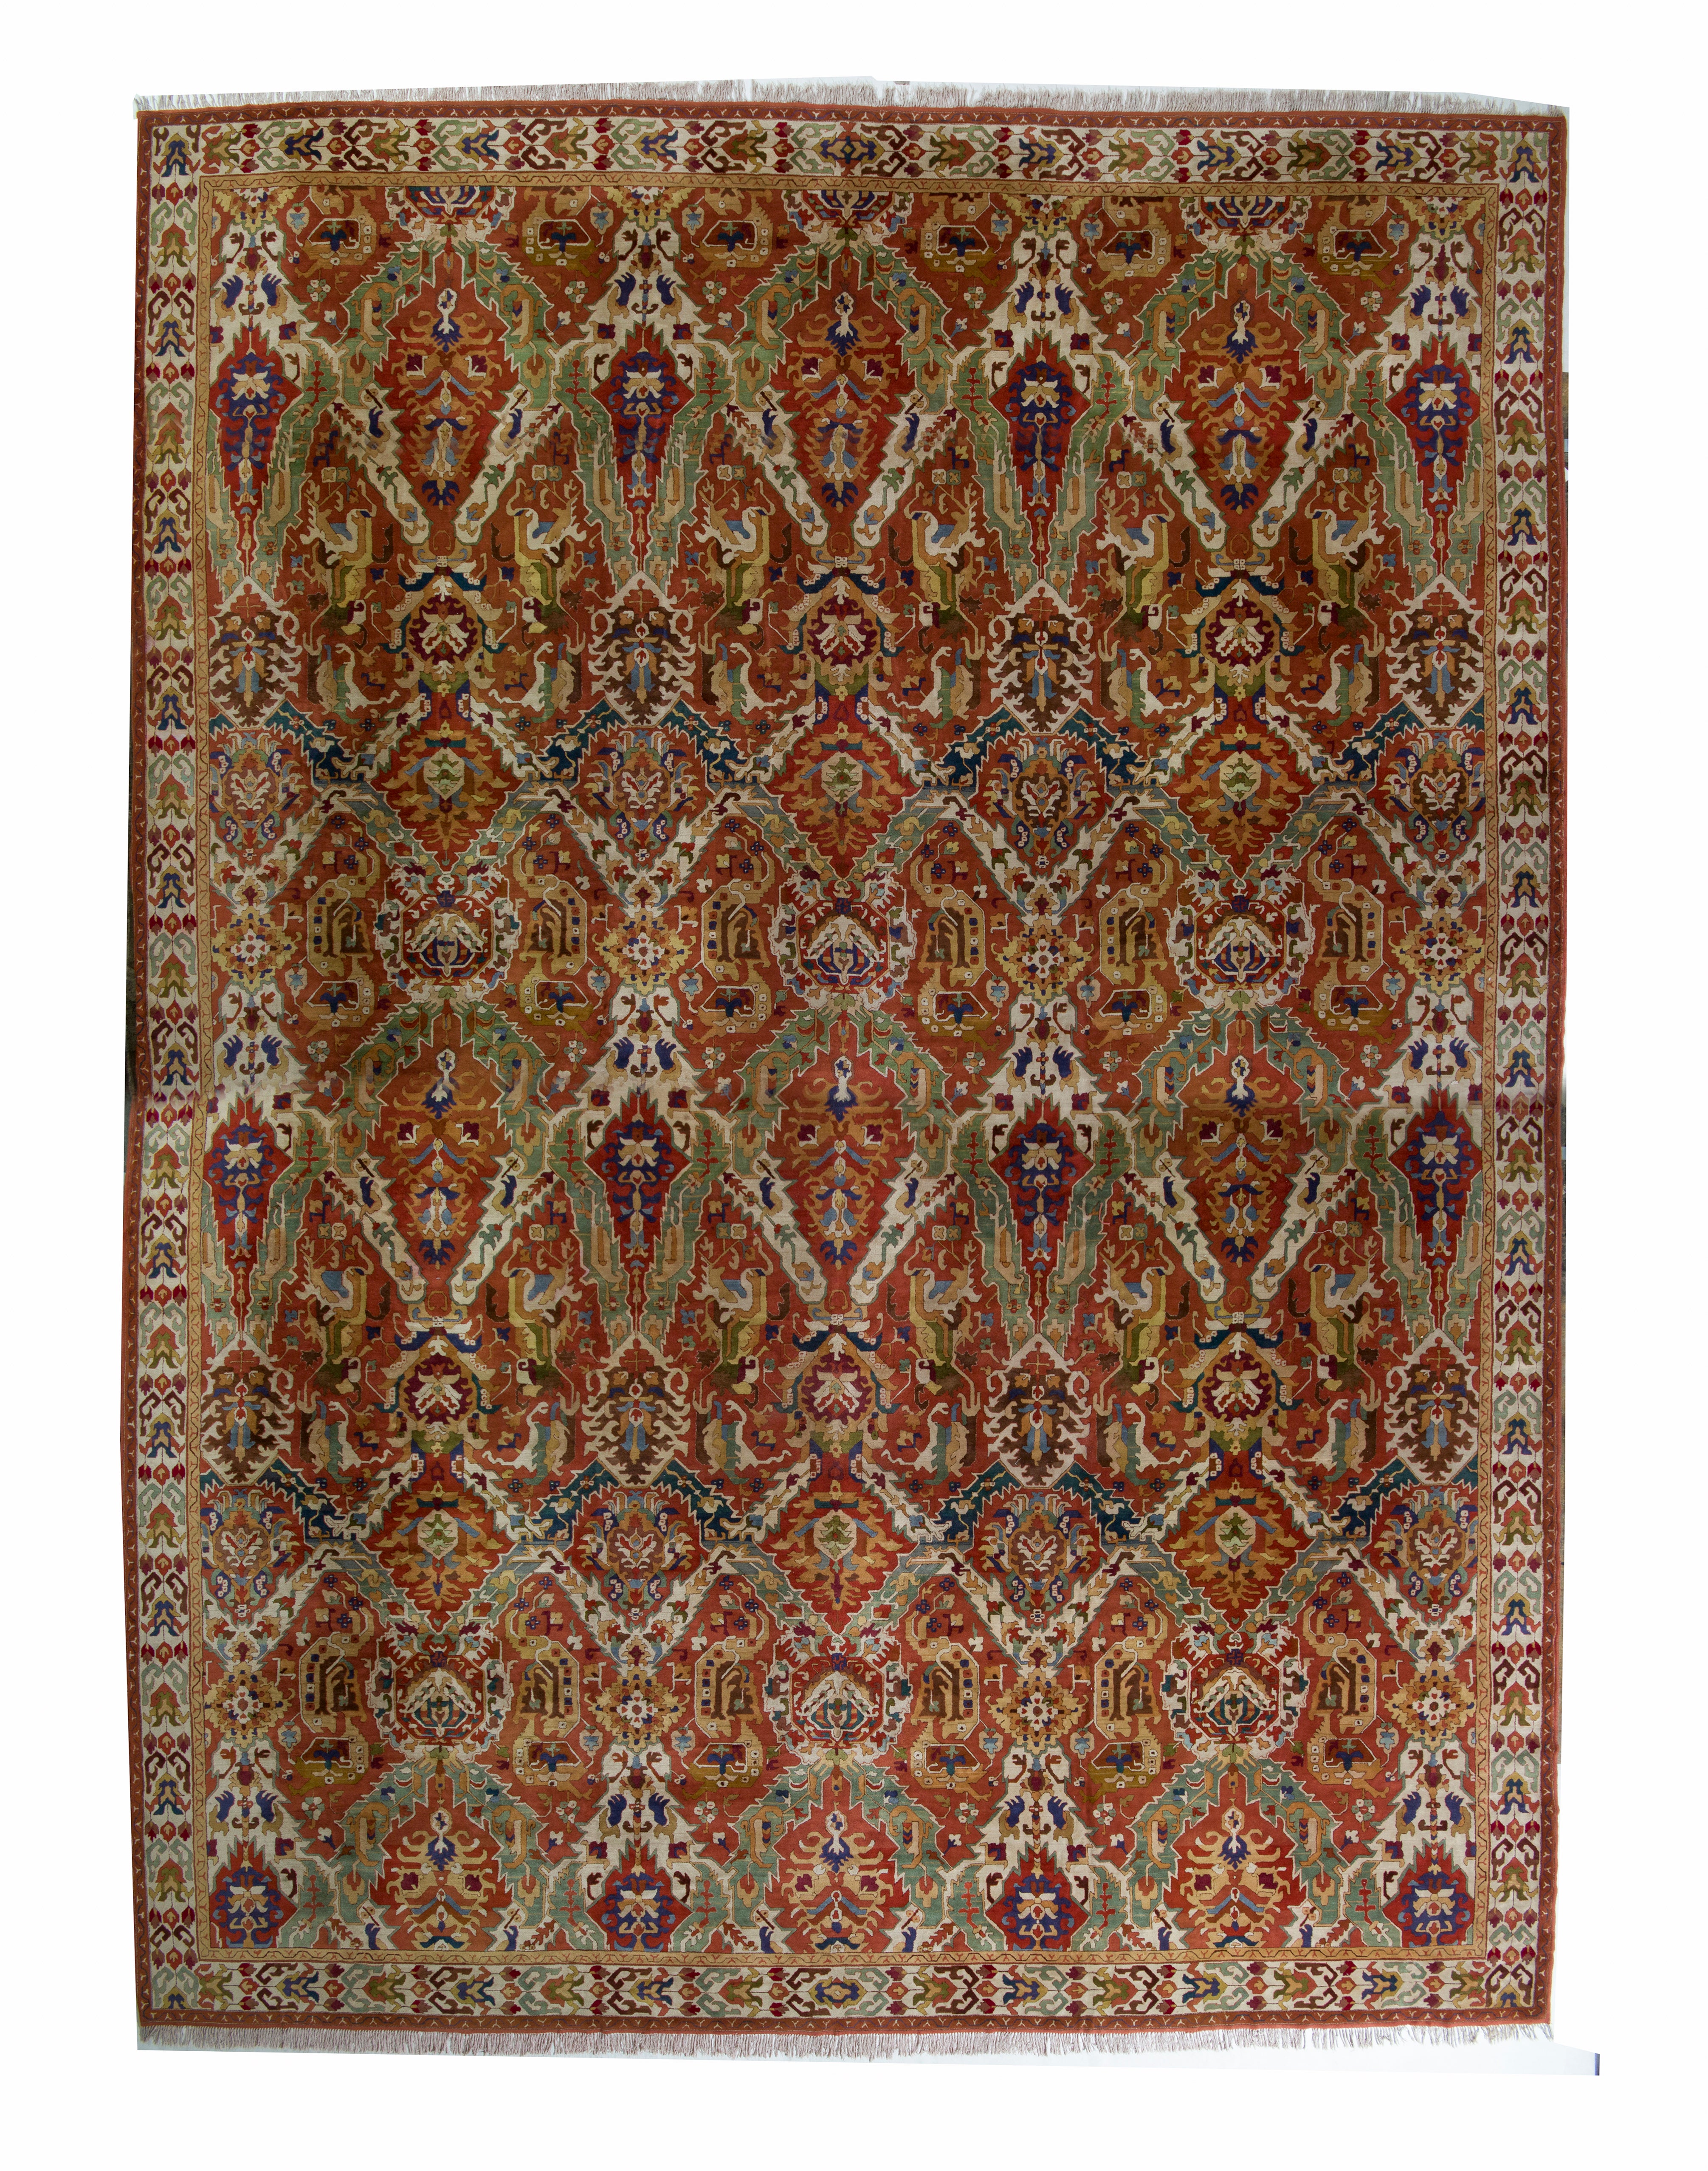 Hand-Hooked Antique Rug in Red and Green All Over Floral Pattern